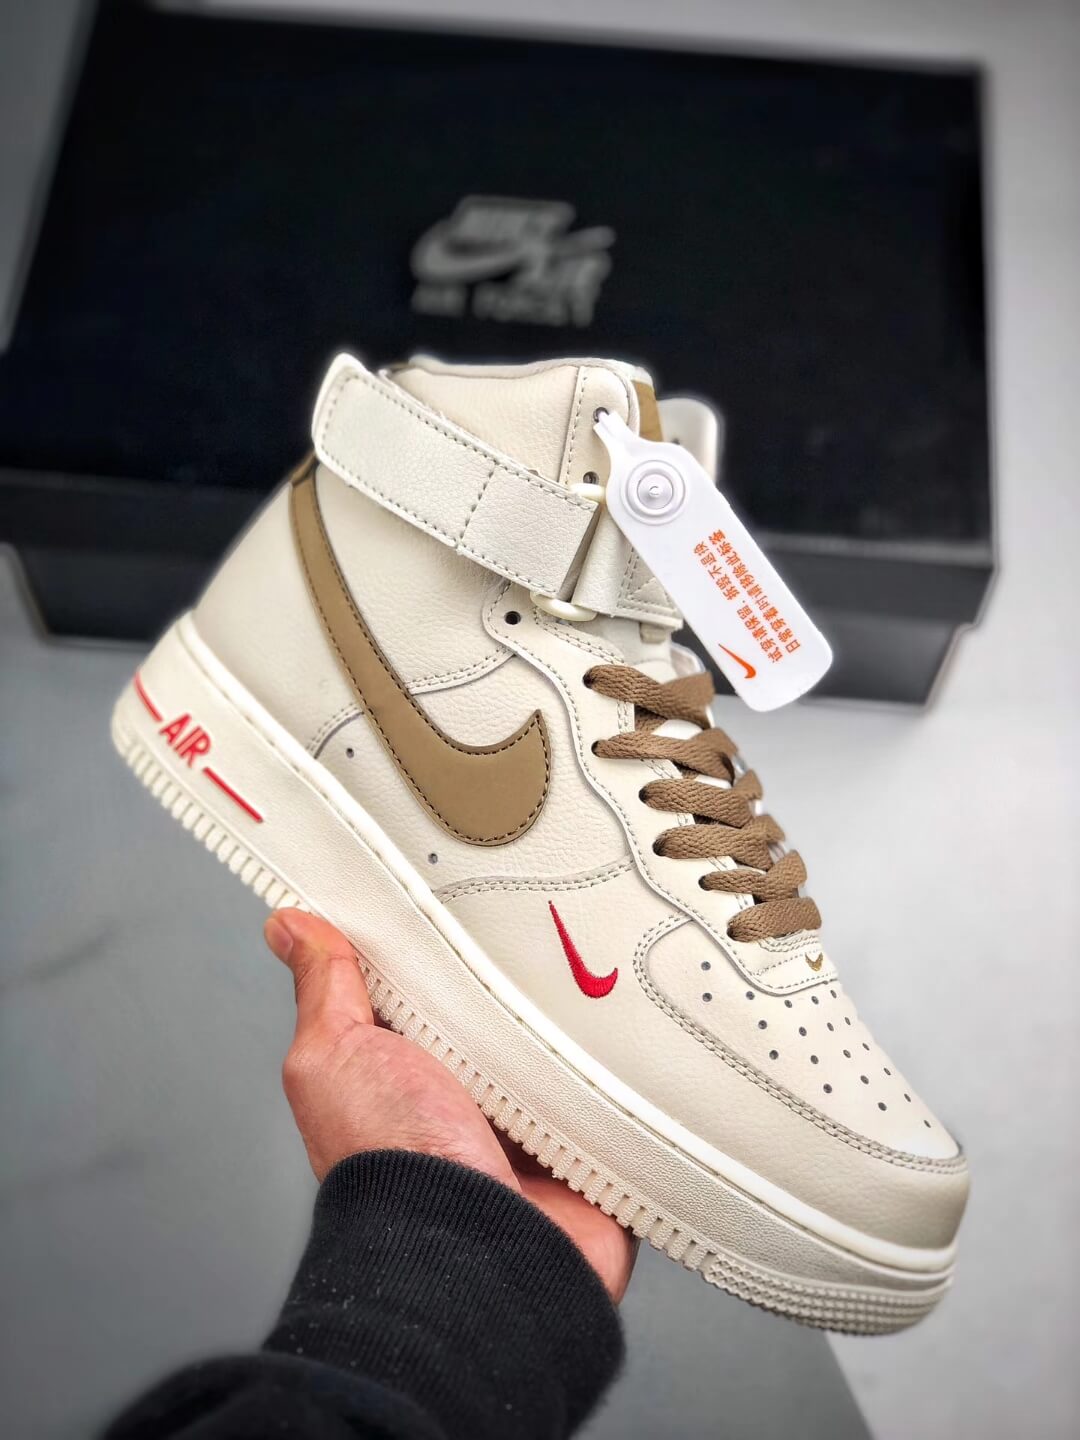 nike air force 1 with tag